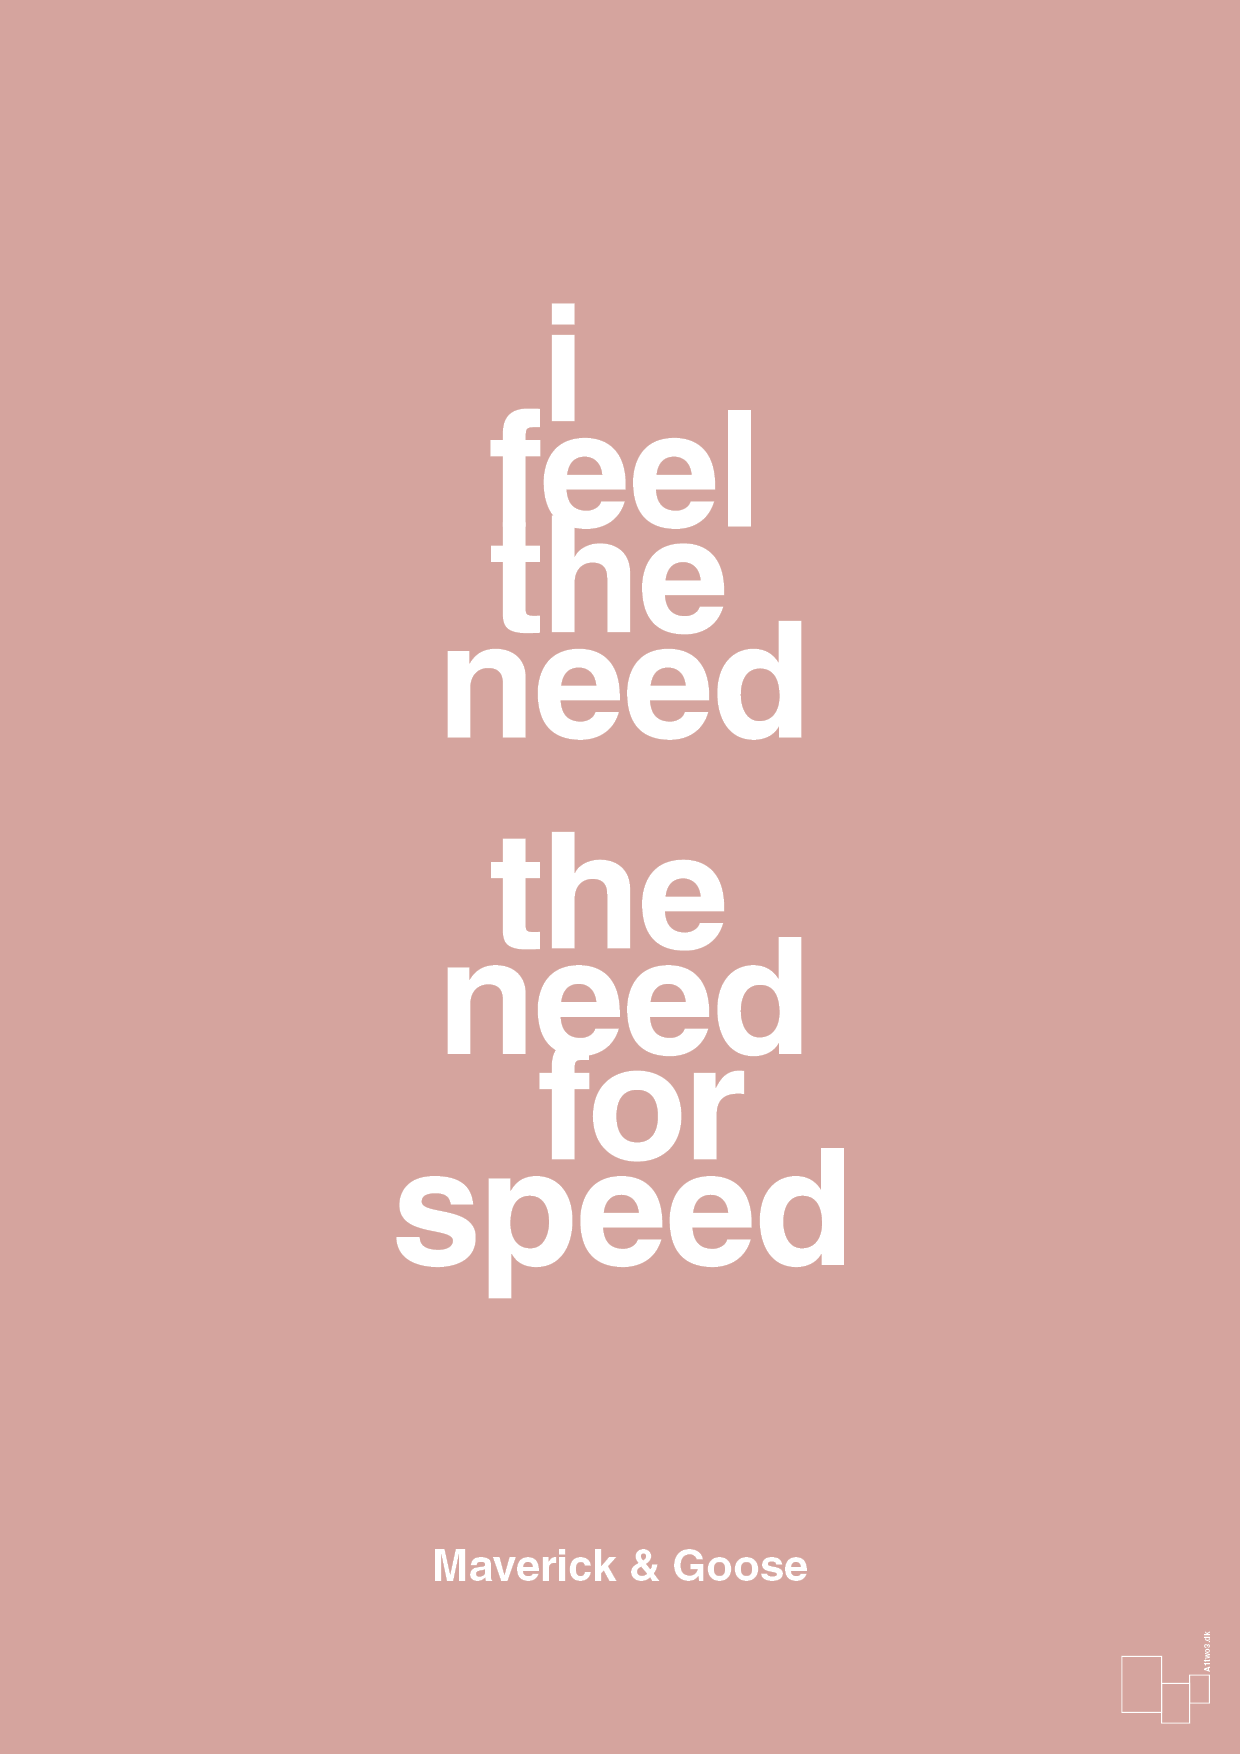 i feel the need the need for speed - Plakat med Citater i Bubble Shell